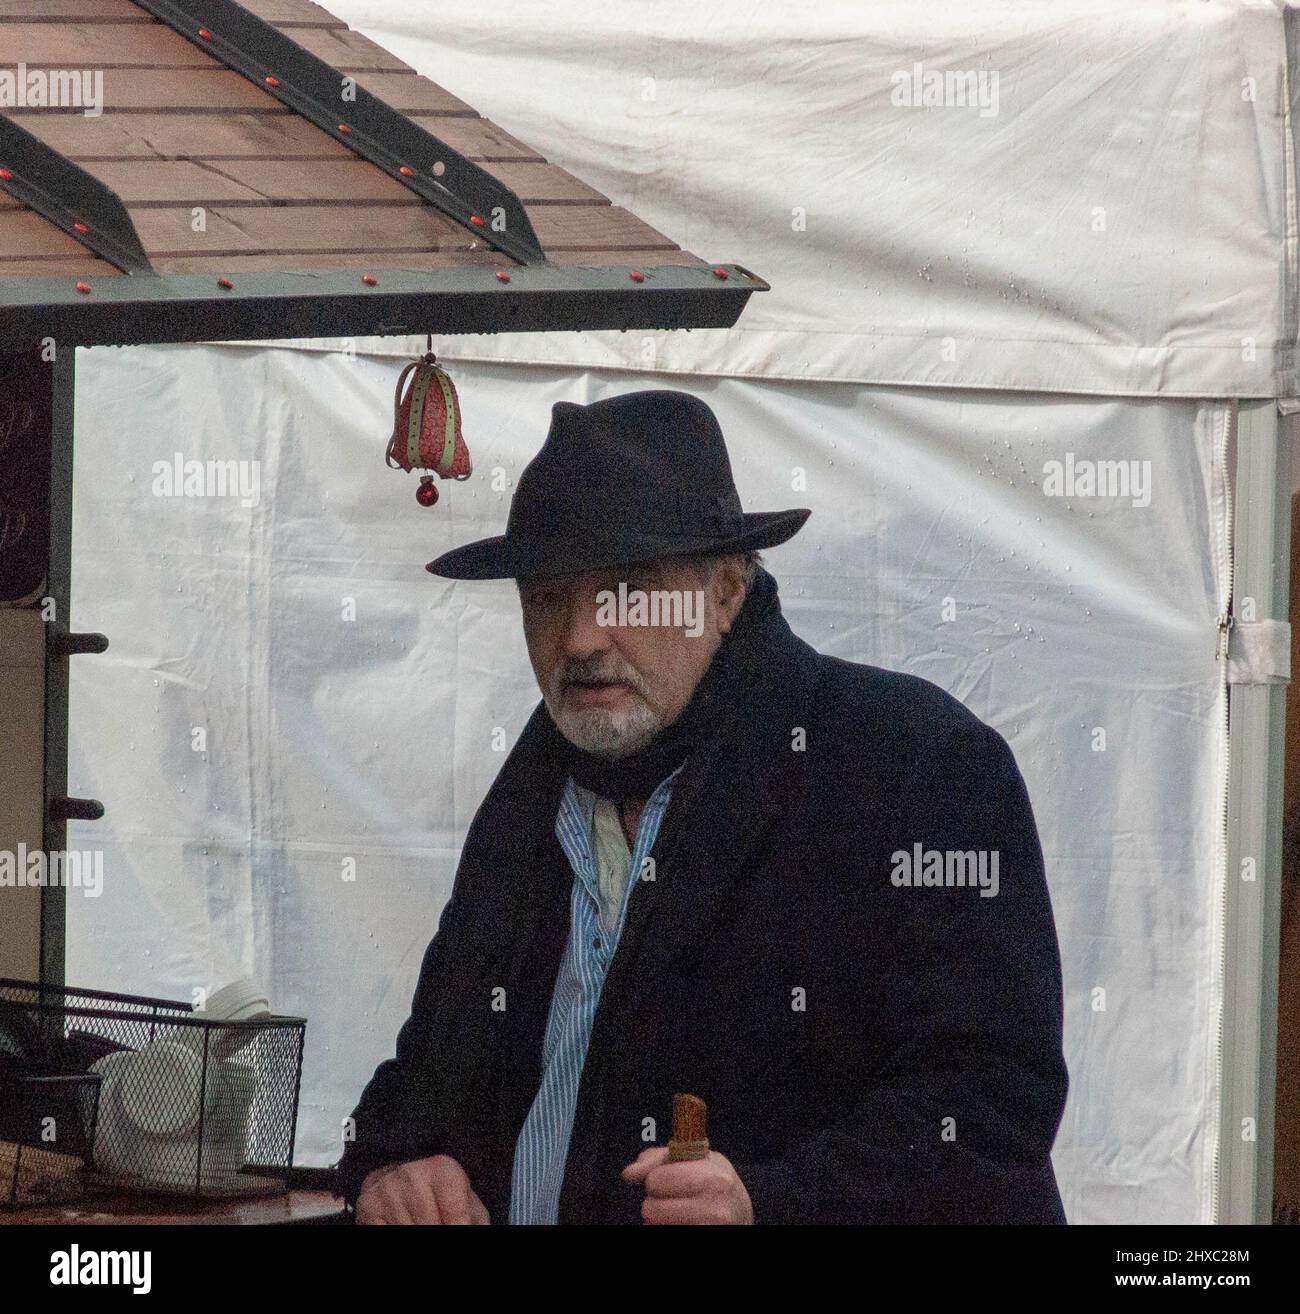 Bantry, West Cork Ireland, Friday 3 March 2022; Ian Baily was seen out and about at the weekly market in Bantry today. The self confessed suspect in the Murder of Sophie Toscan Du Plantier at Her holiday home in Schull on December 23 1996. Mr. Baily, is awaiting an appeal to a driving charge last year after being stopped at a checkpoint in West Cork in 2019. He was convicted of possession of cannibas in his car, drug driving, possession of cannibas at Bantry Garda Station and allowing his car to be used for the possession of cannibas. Credit; ED/Alamy Live News Stock Photo